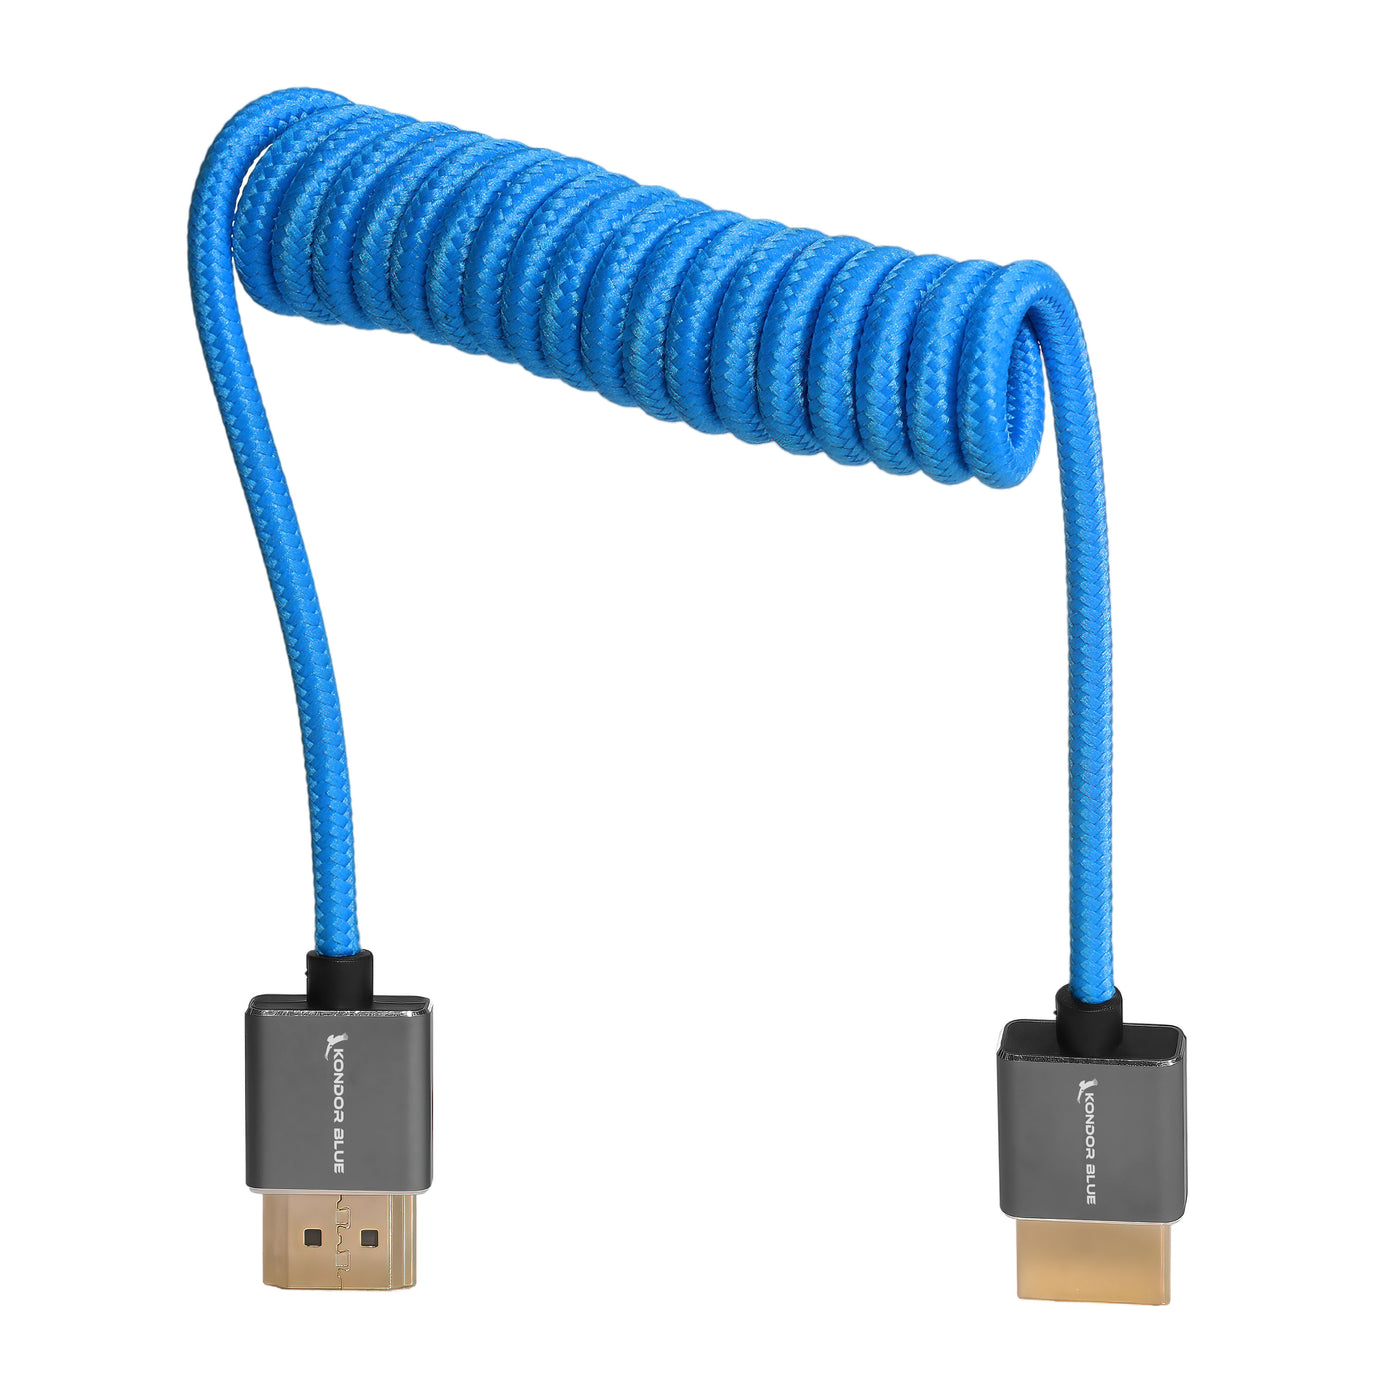 Full HDMI Cable for On-Camera Monitors 12"-24" Braided Coiled